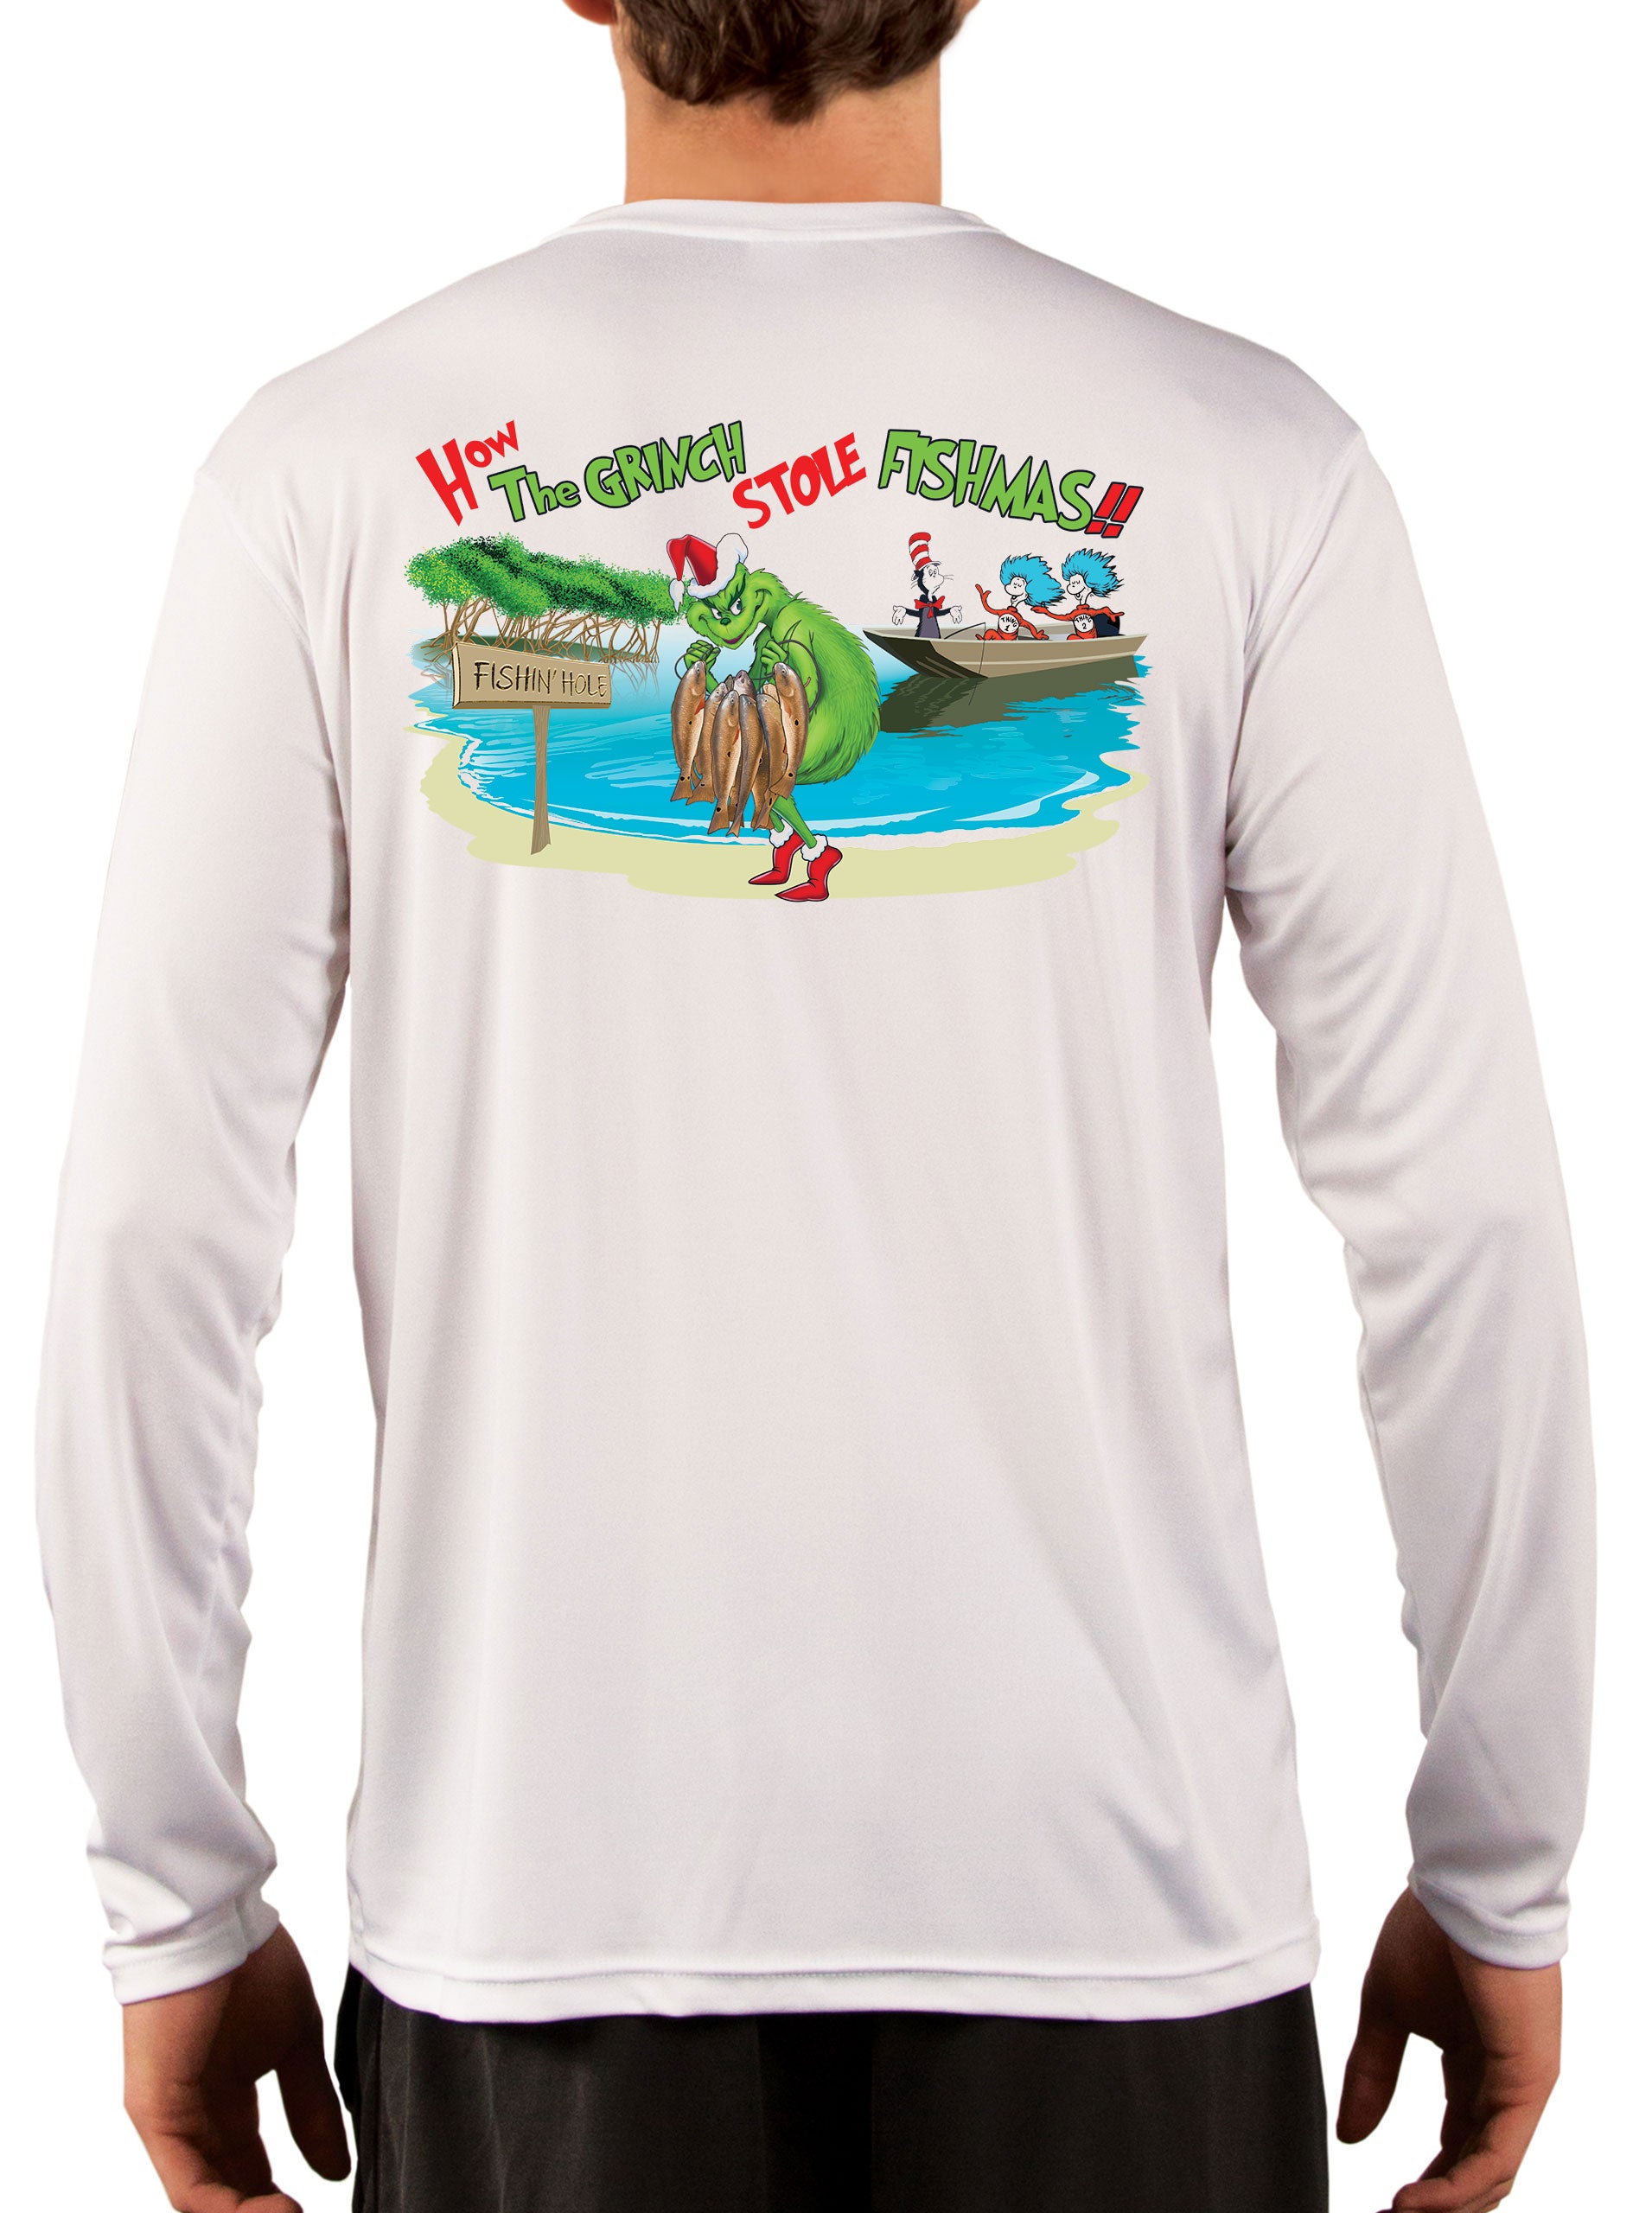 Dr. Seuss The Grinch Who Stole Christmas Fishmas Fishing Shirts by Skiff Life Small / White